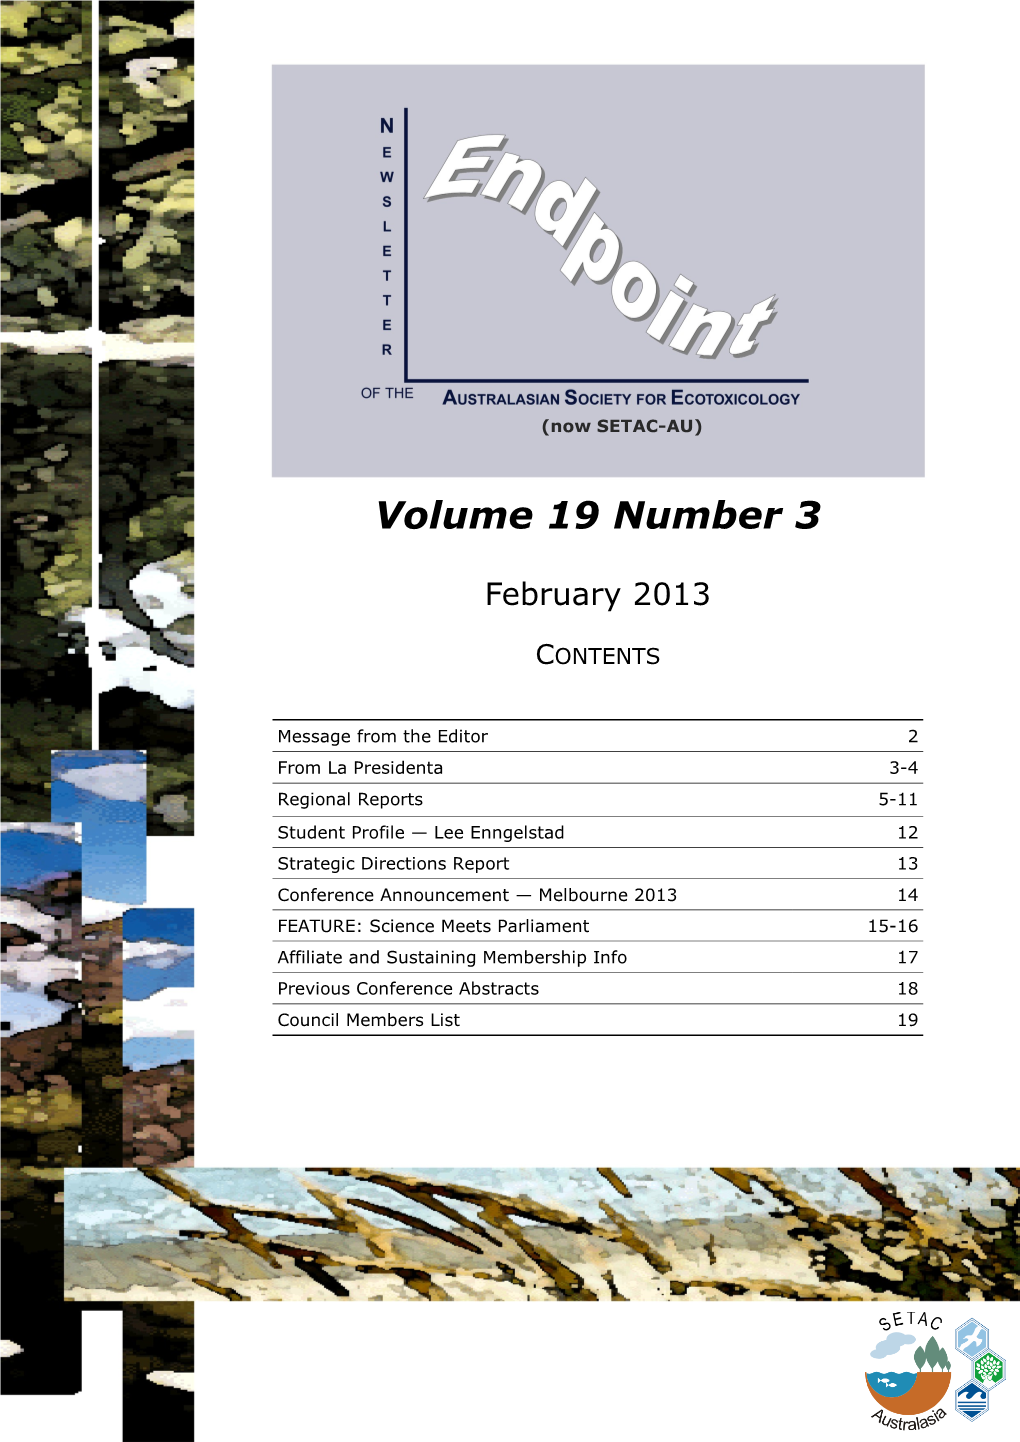 Endpoint Vol 19